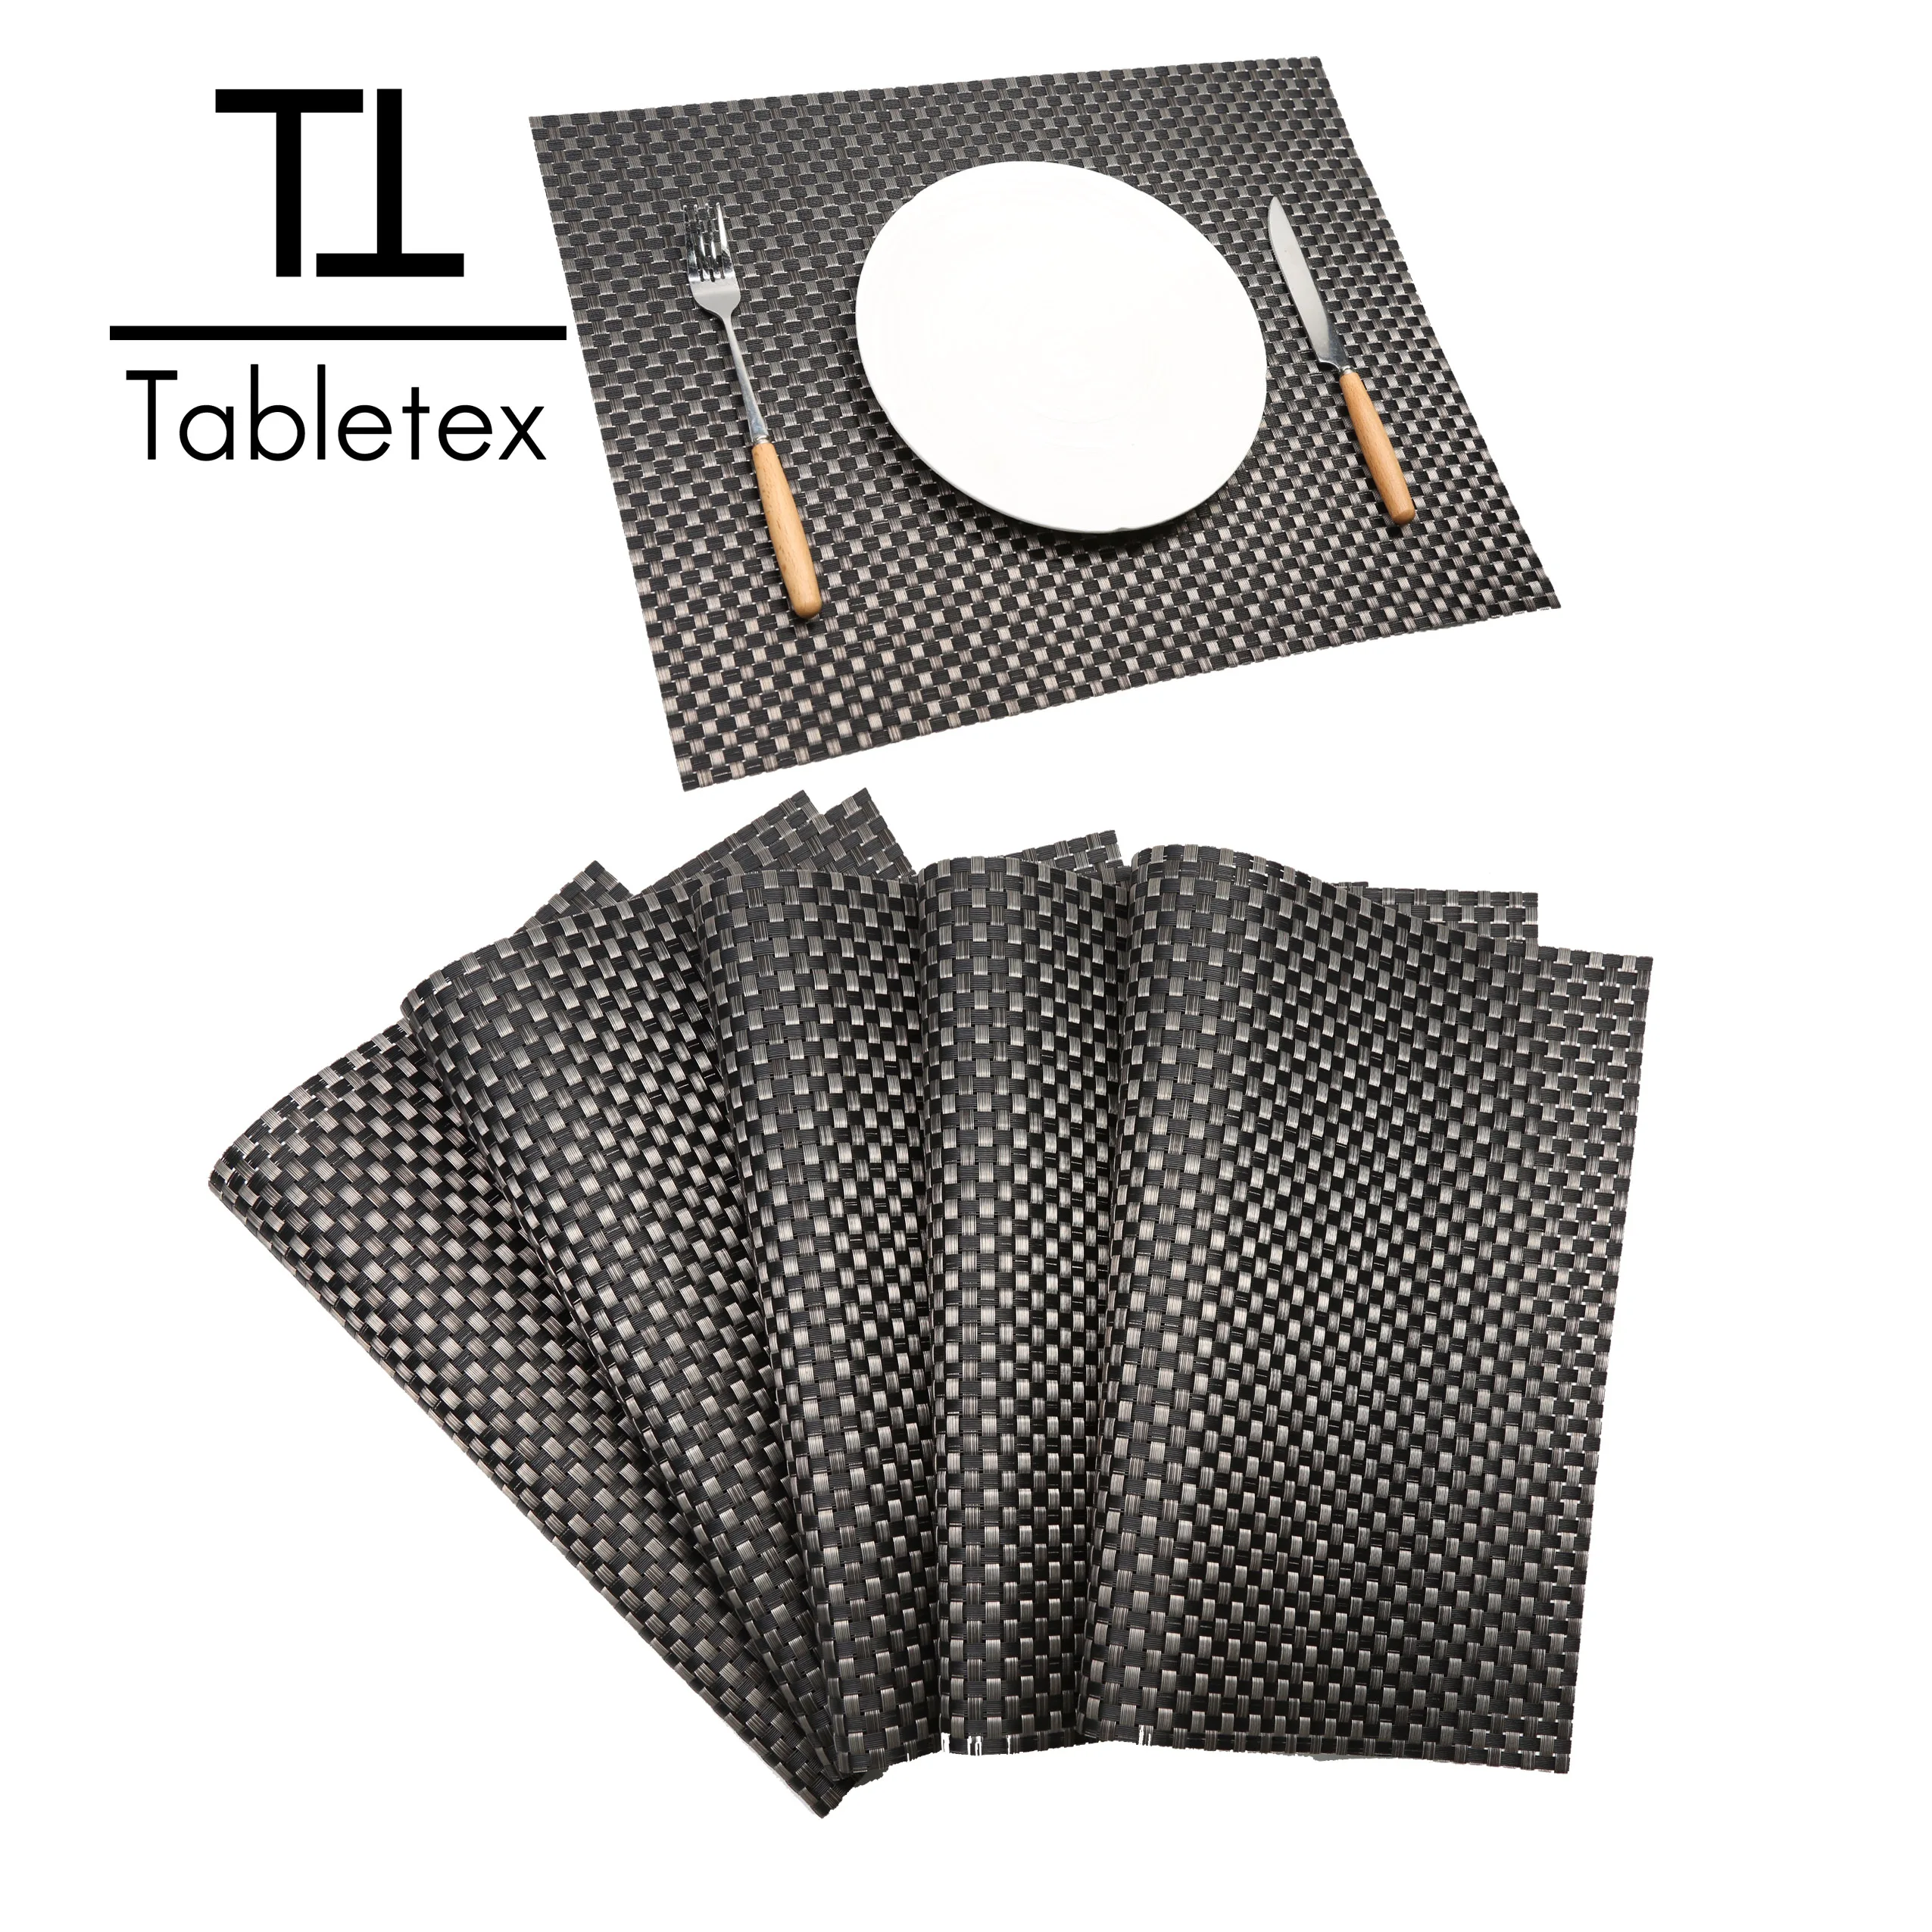 

Tabletex Dining Table Washable Woven Vinyl Placemat Non-Slip Heat Resistant Kitchen Table Mats Easy to Clean, Could be any color